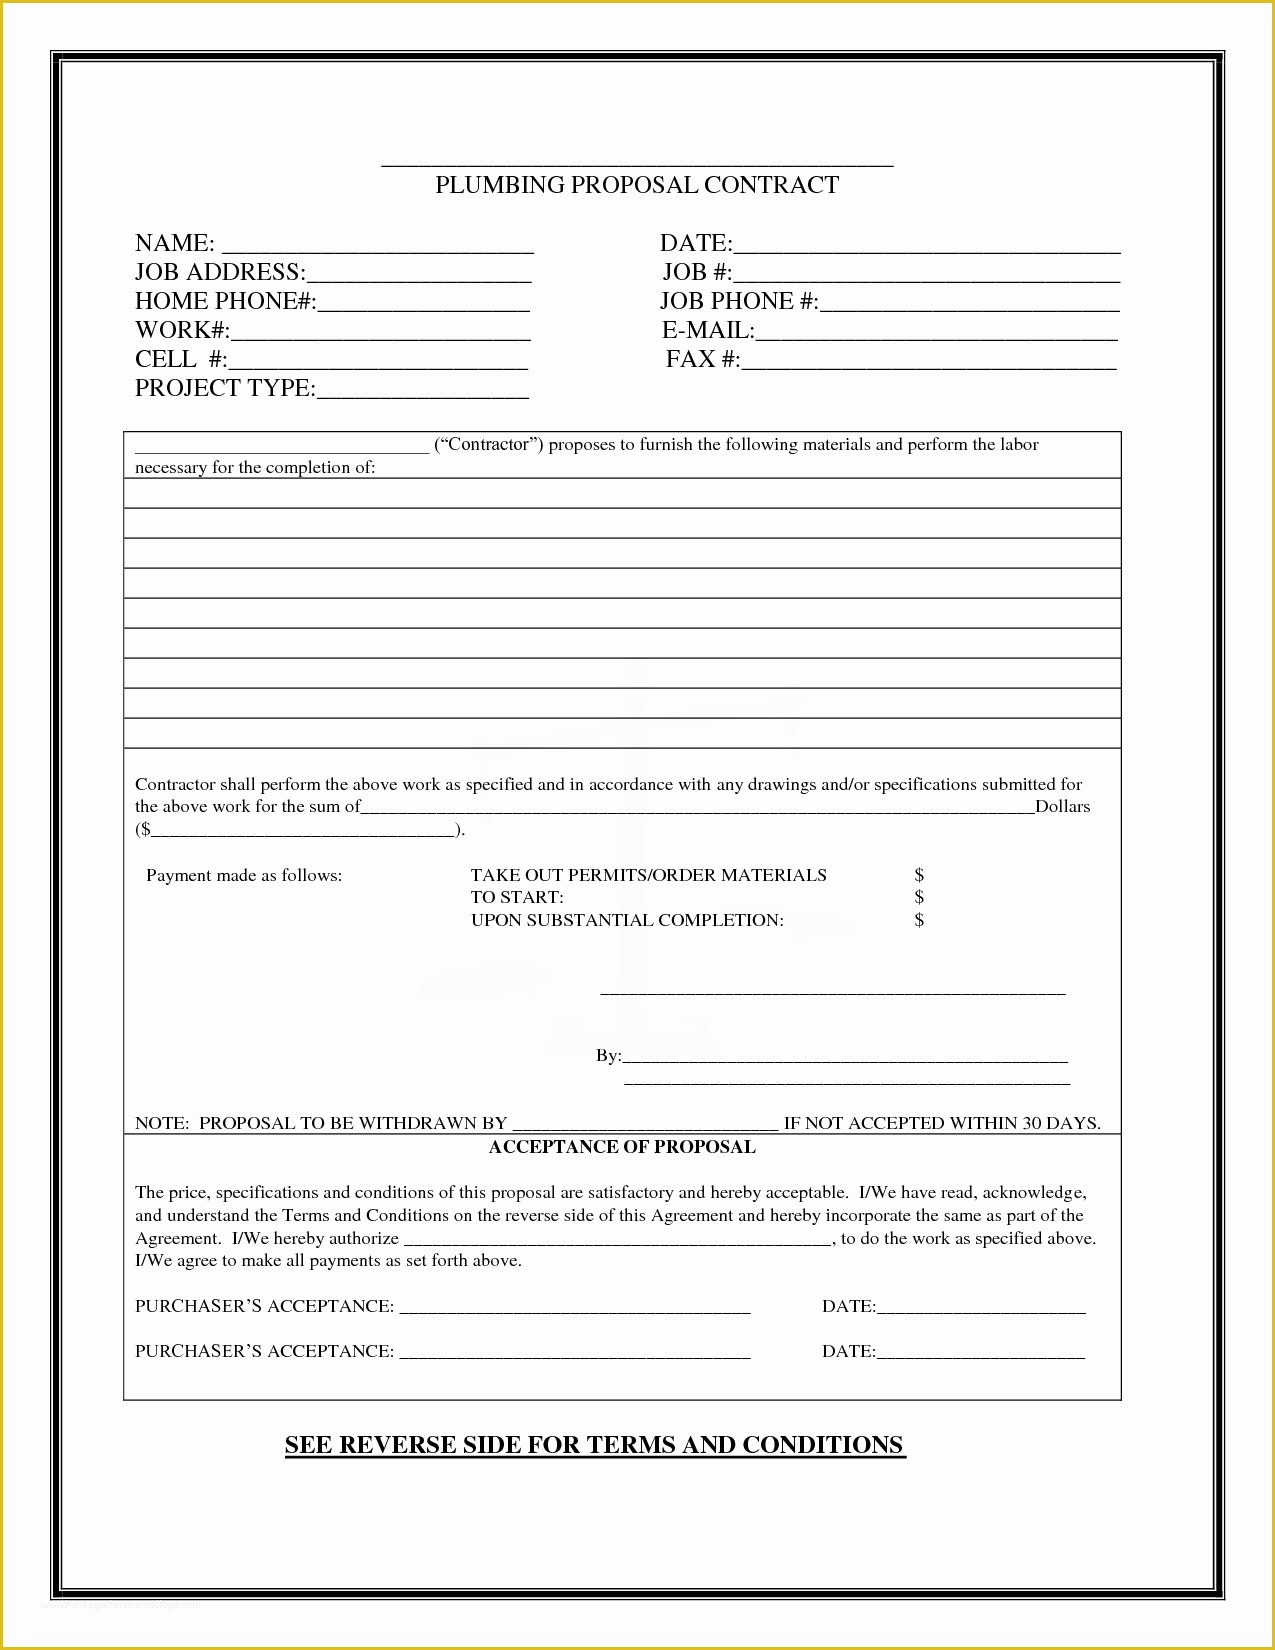 Bid form Template Free Of [plumbing Proposal Template Free] 80 Images 1000